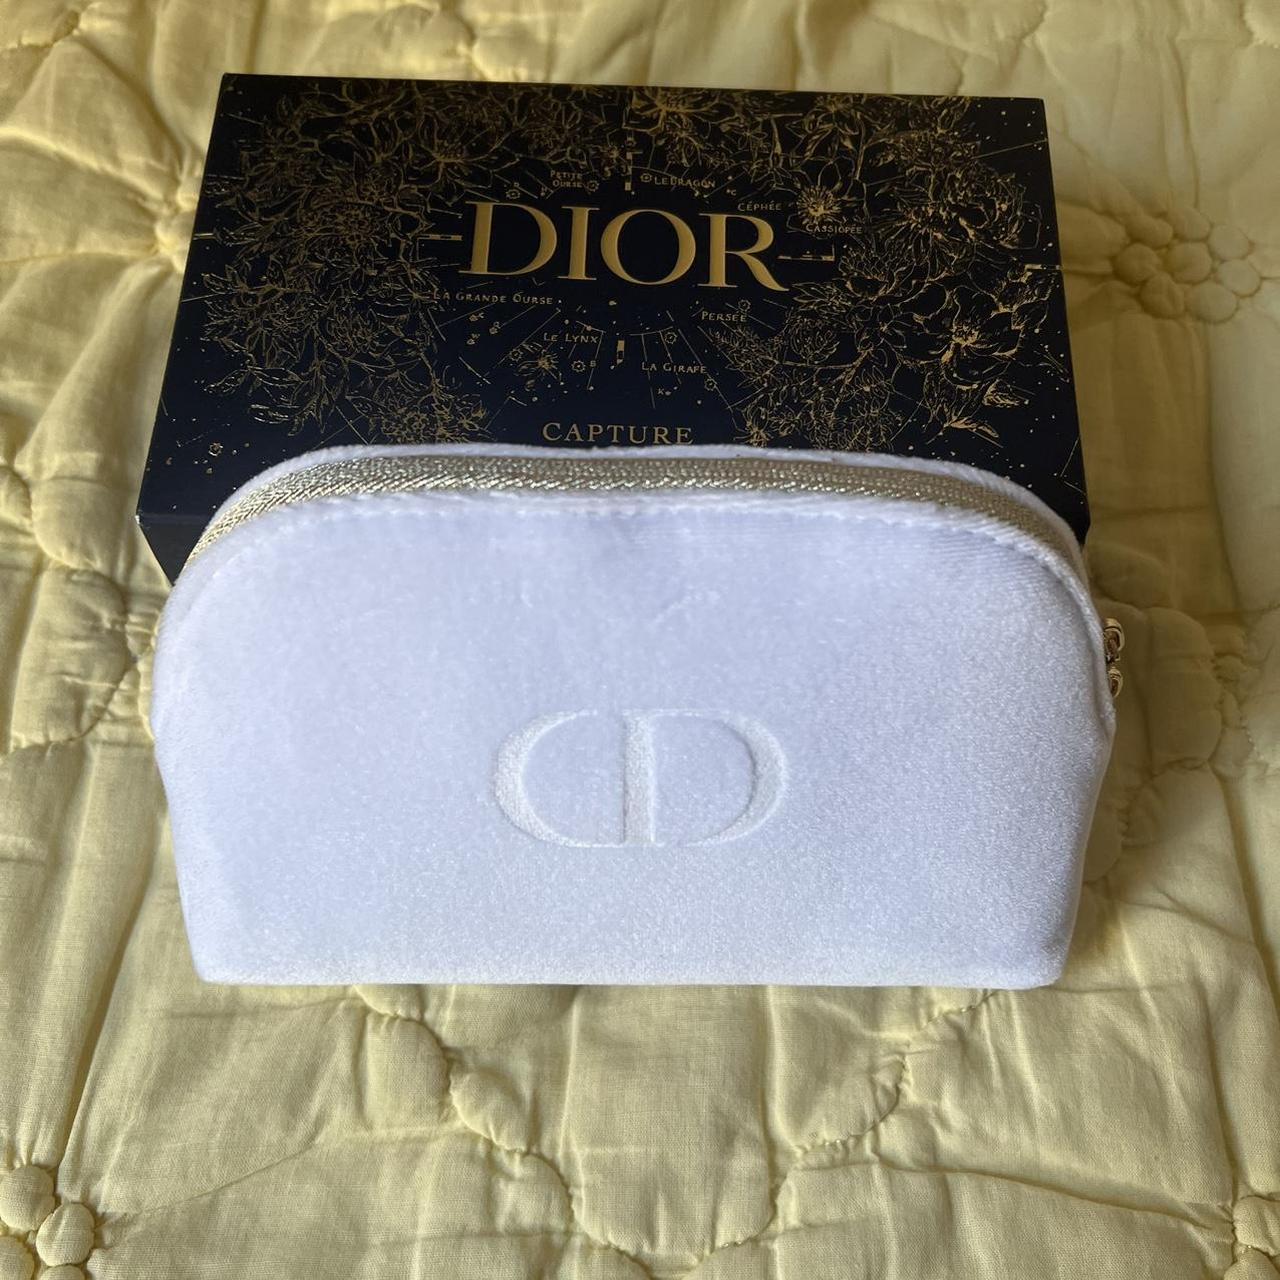 Dior Women's White and Gold Bag